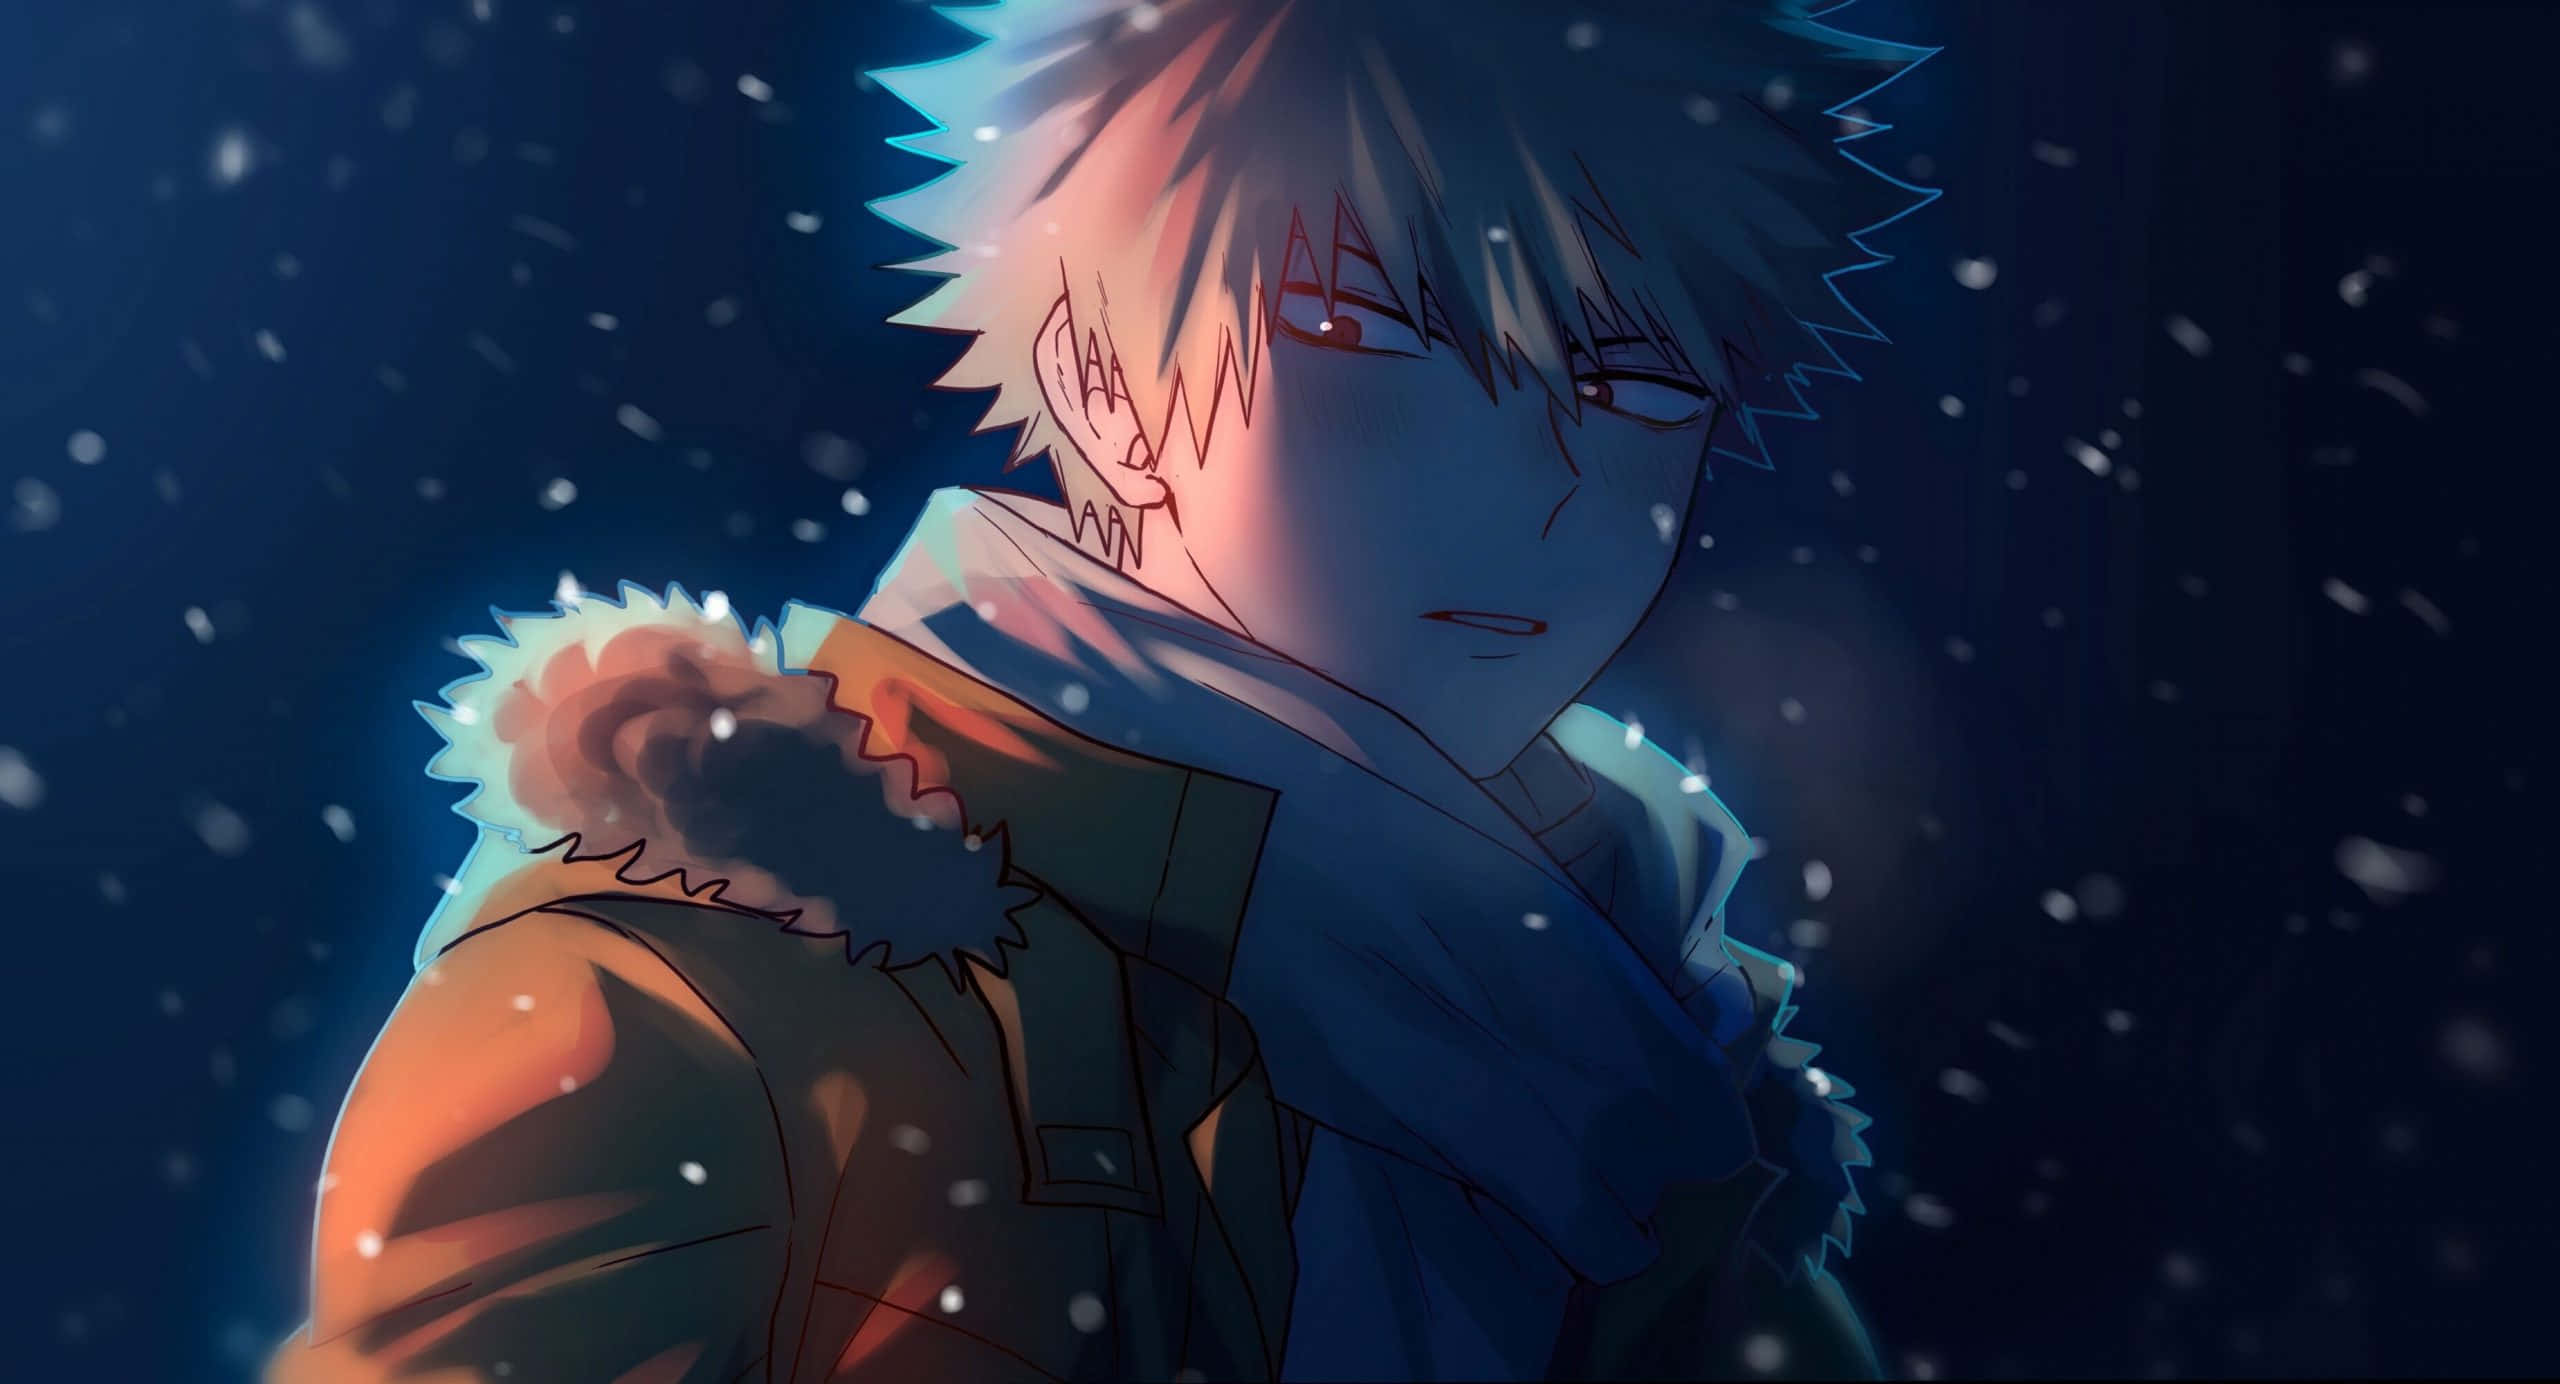 Caption: Bakugou unleashes his explosive power in this stunning high-definition background.